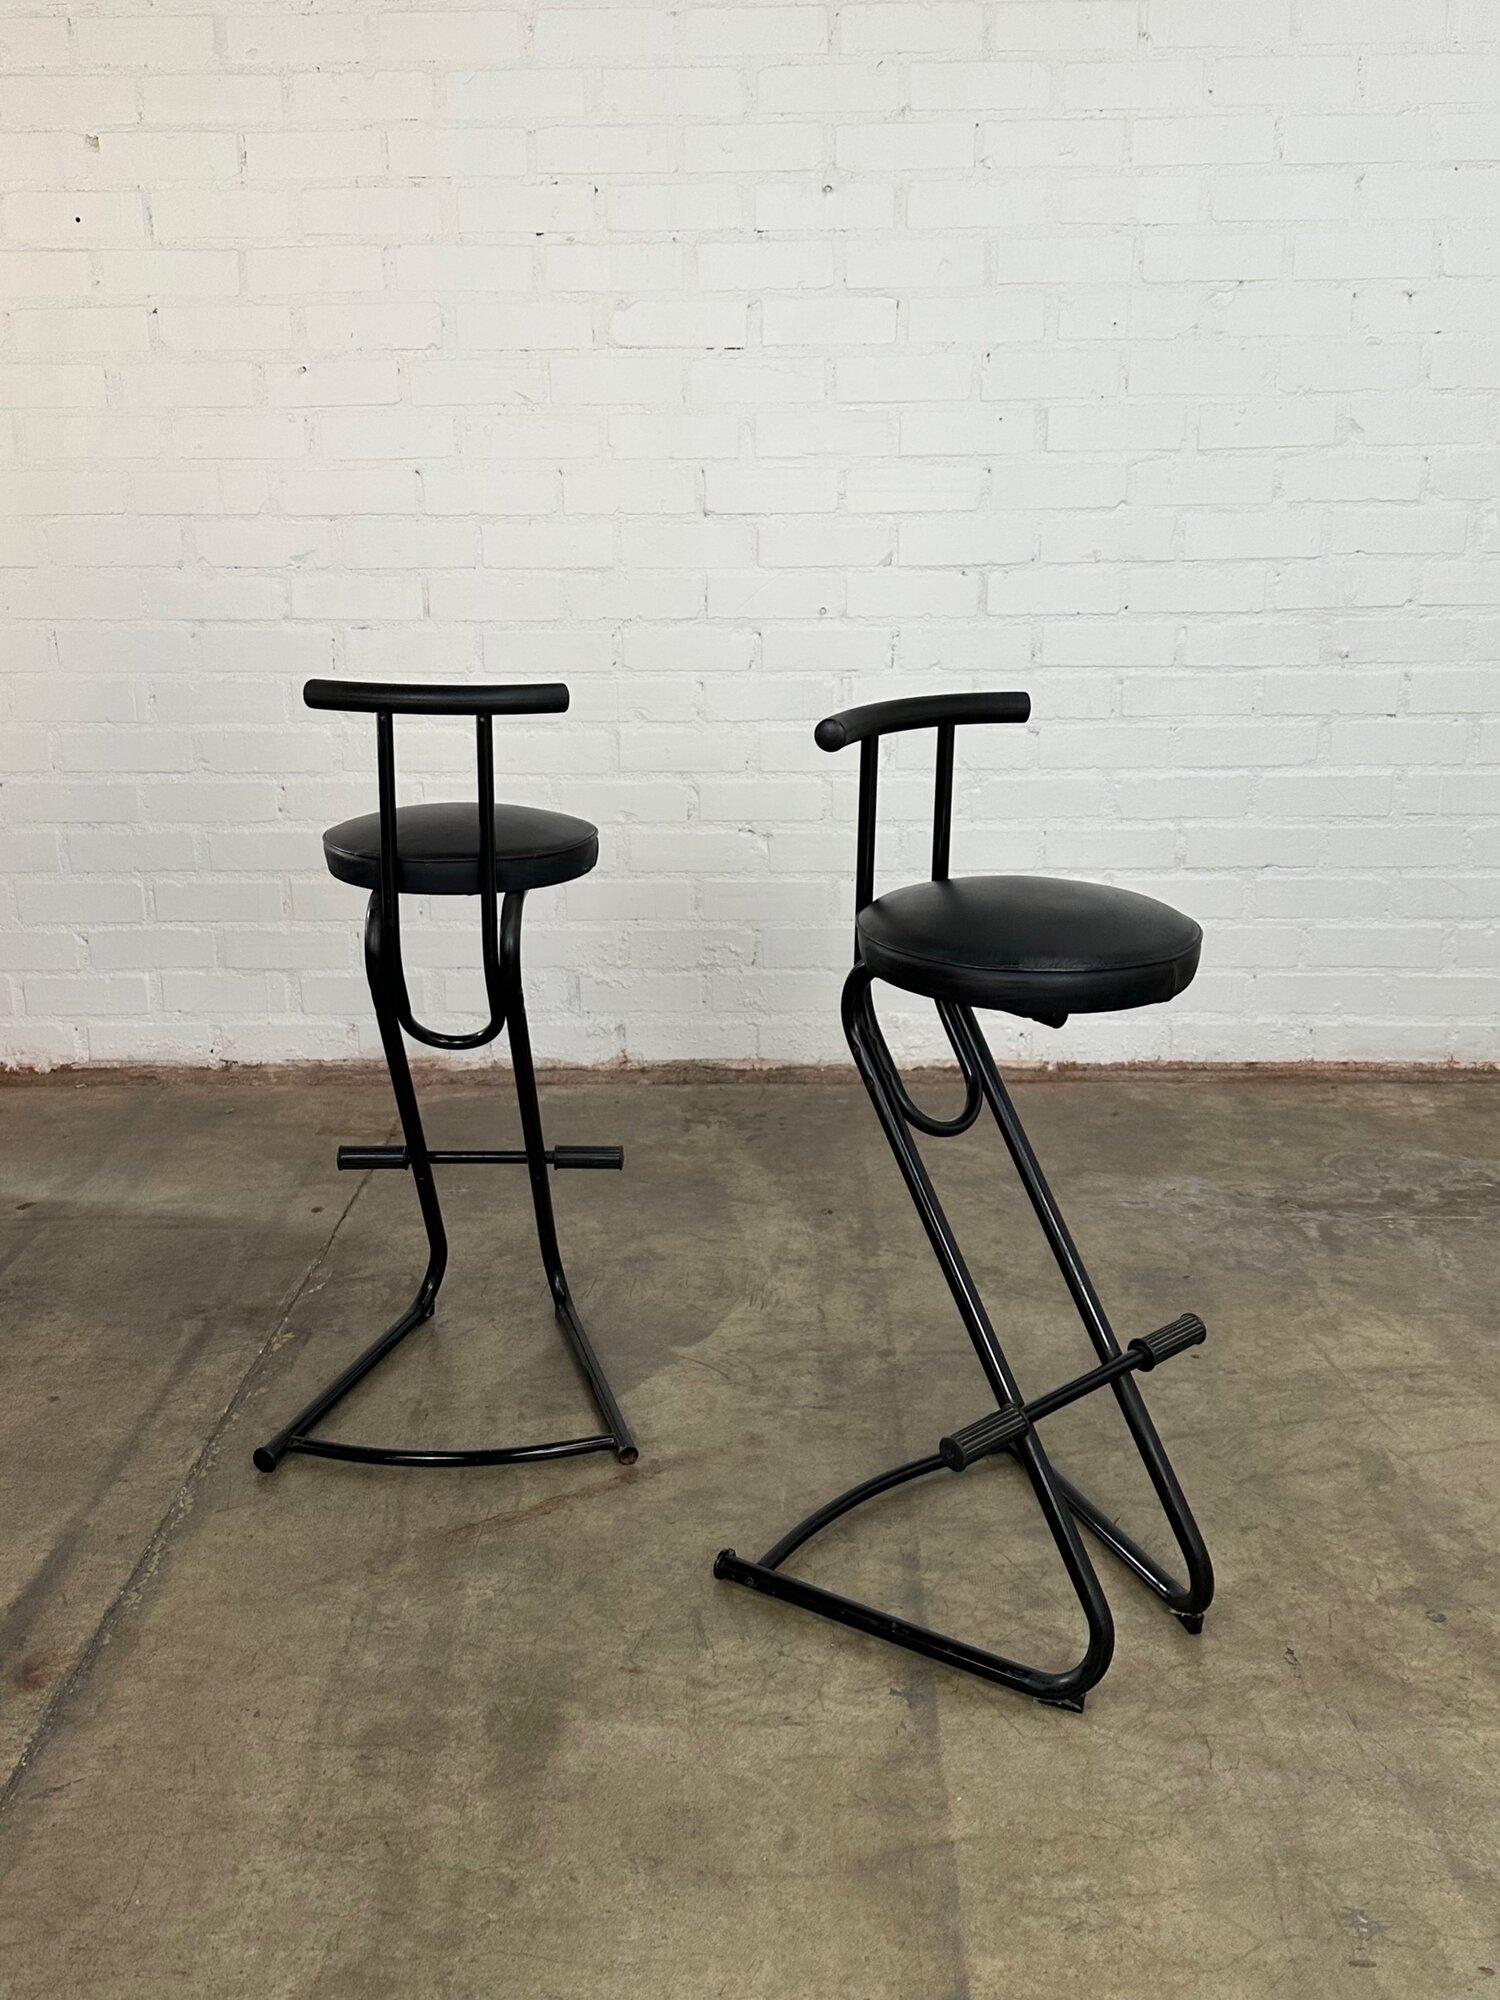 Measures: W20 D21 H39.5 SW14 SD14 SH31

Black postmodern barstools with vinyl seats. Item is in good vintage condition, no visible rips or tears. Price is for the pair.